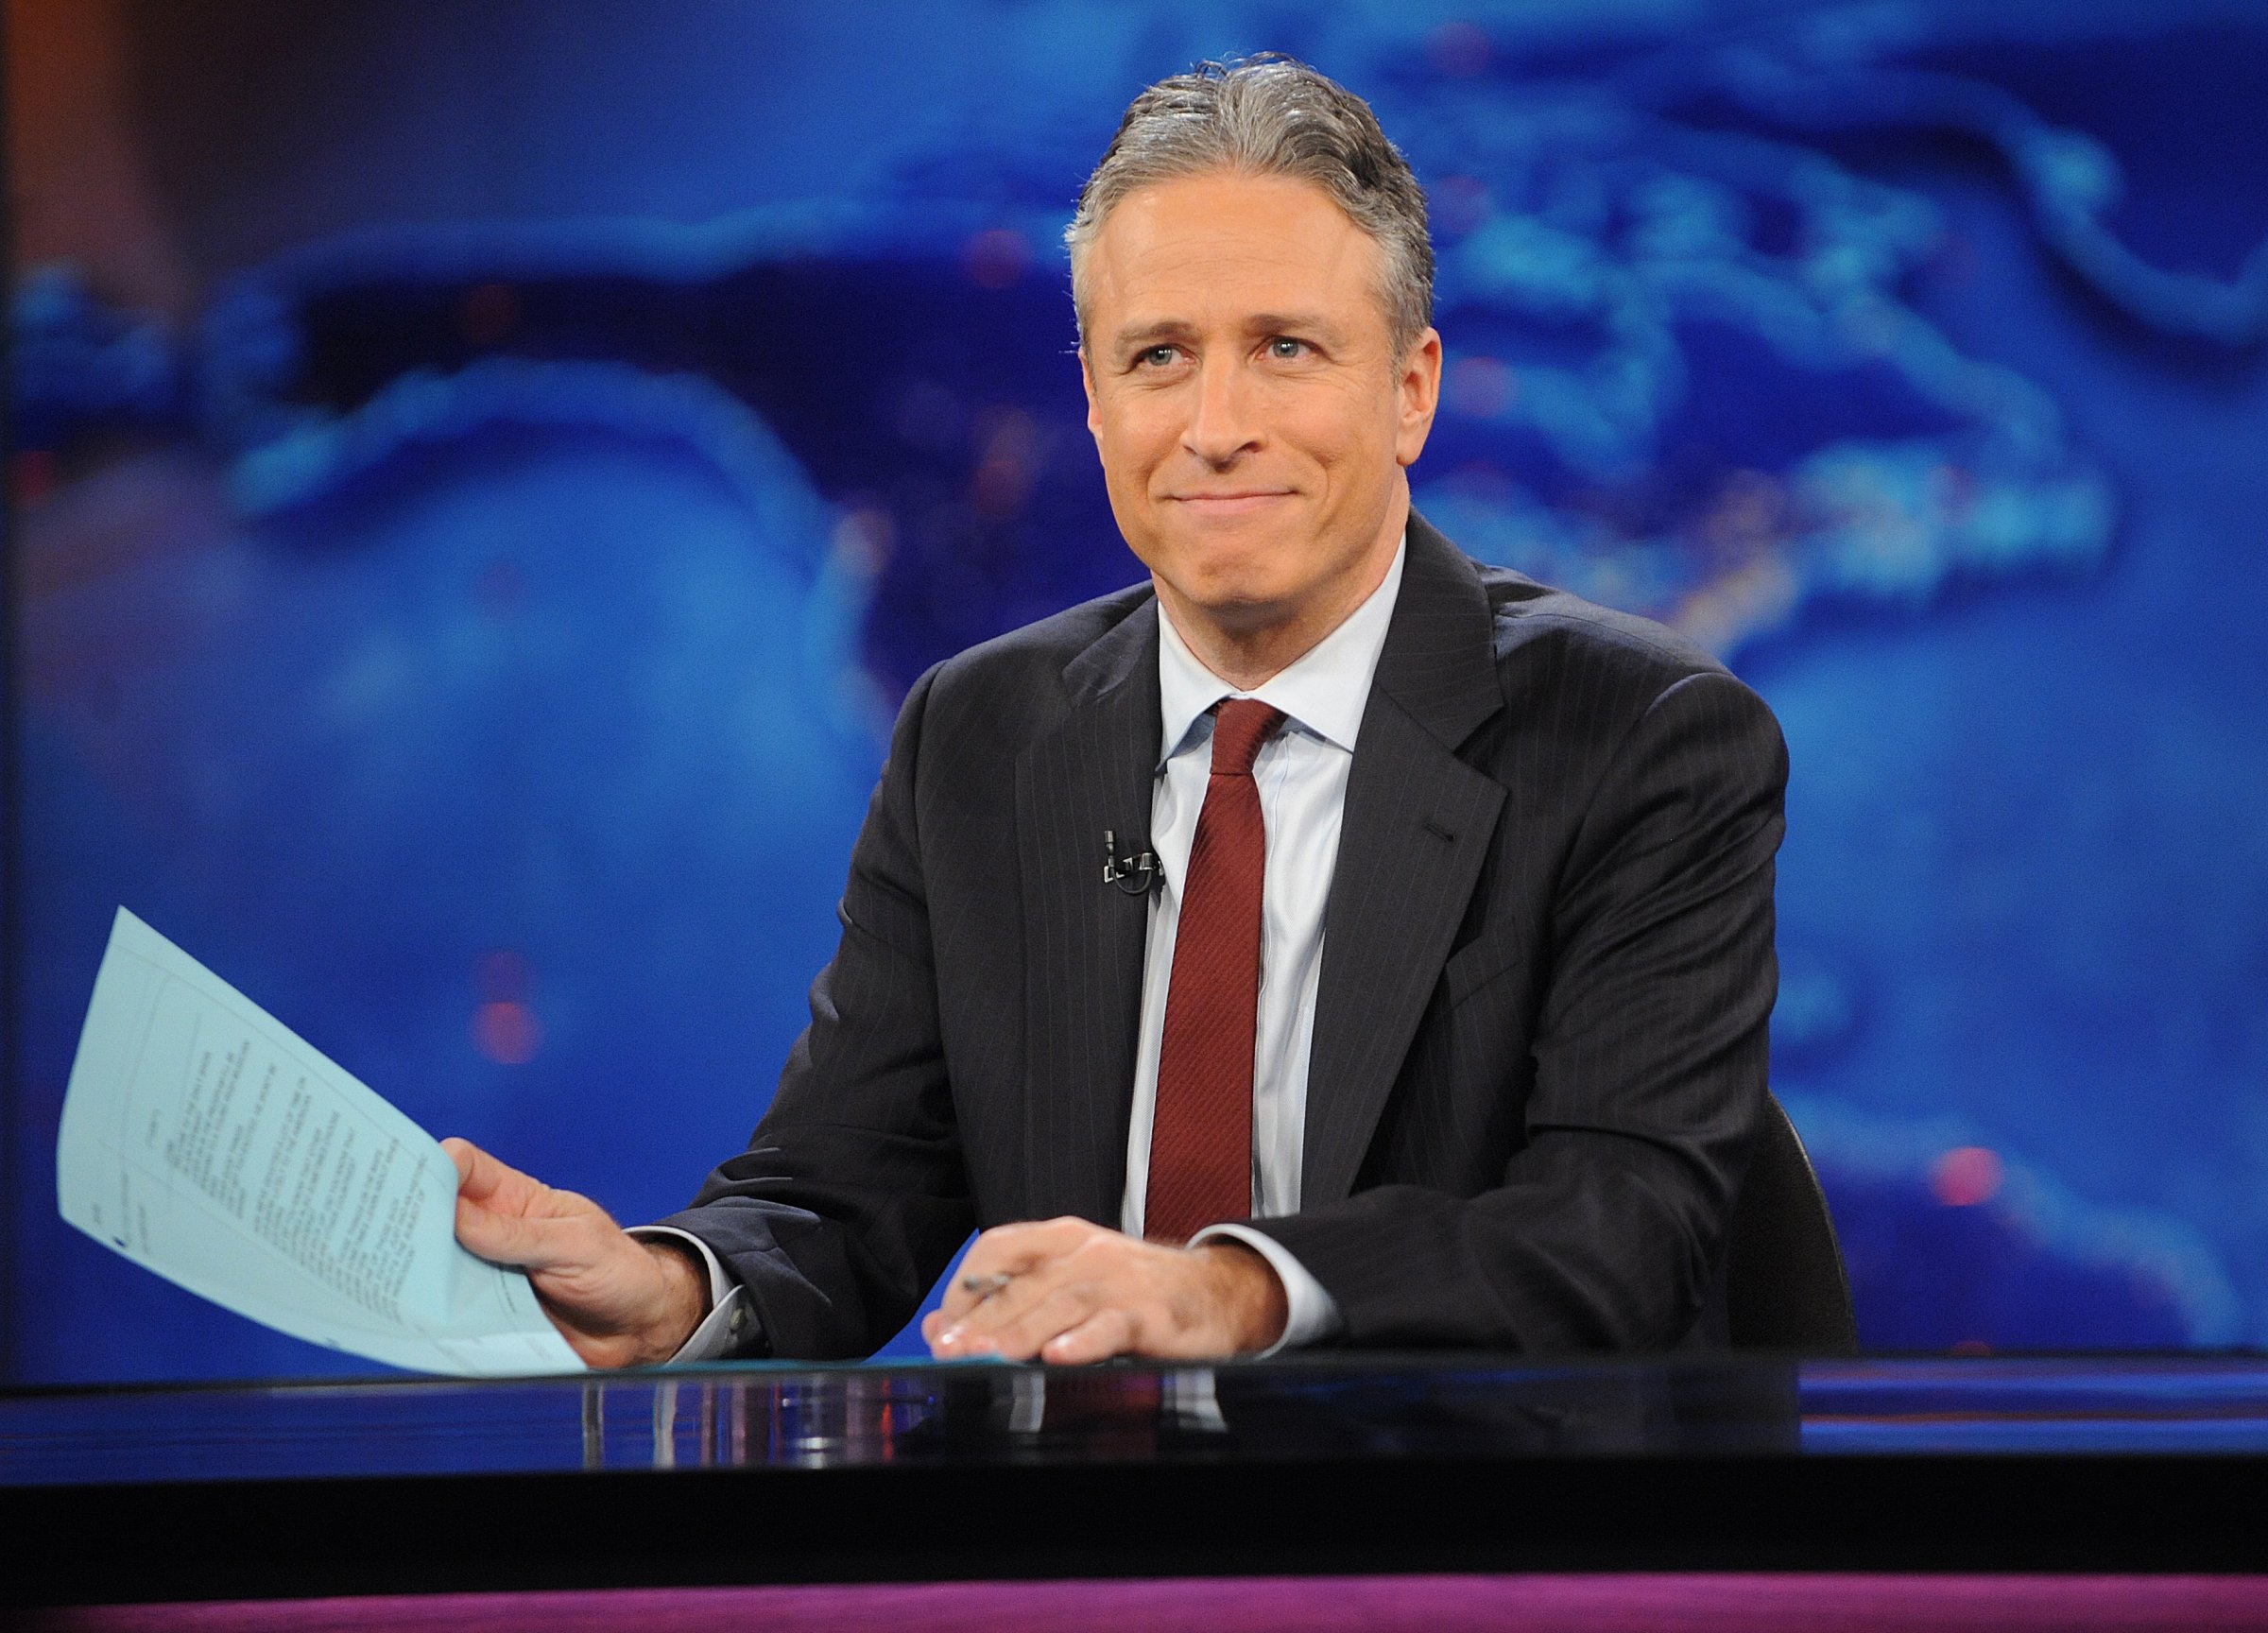 Jon Stewart during a taping of "The Daily Show with Jon Stewart" in 2011.